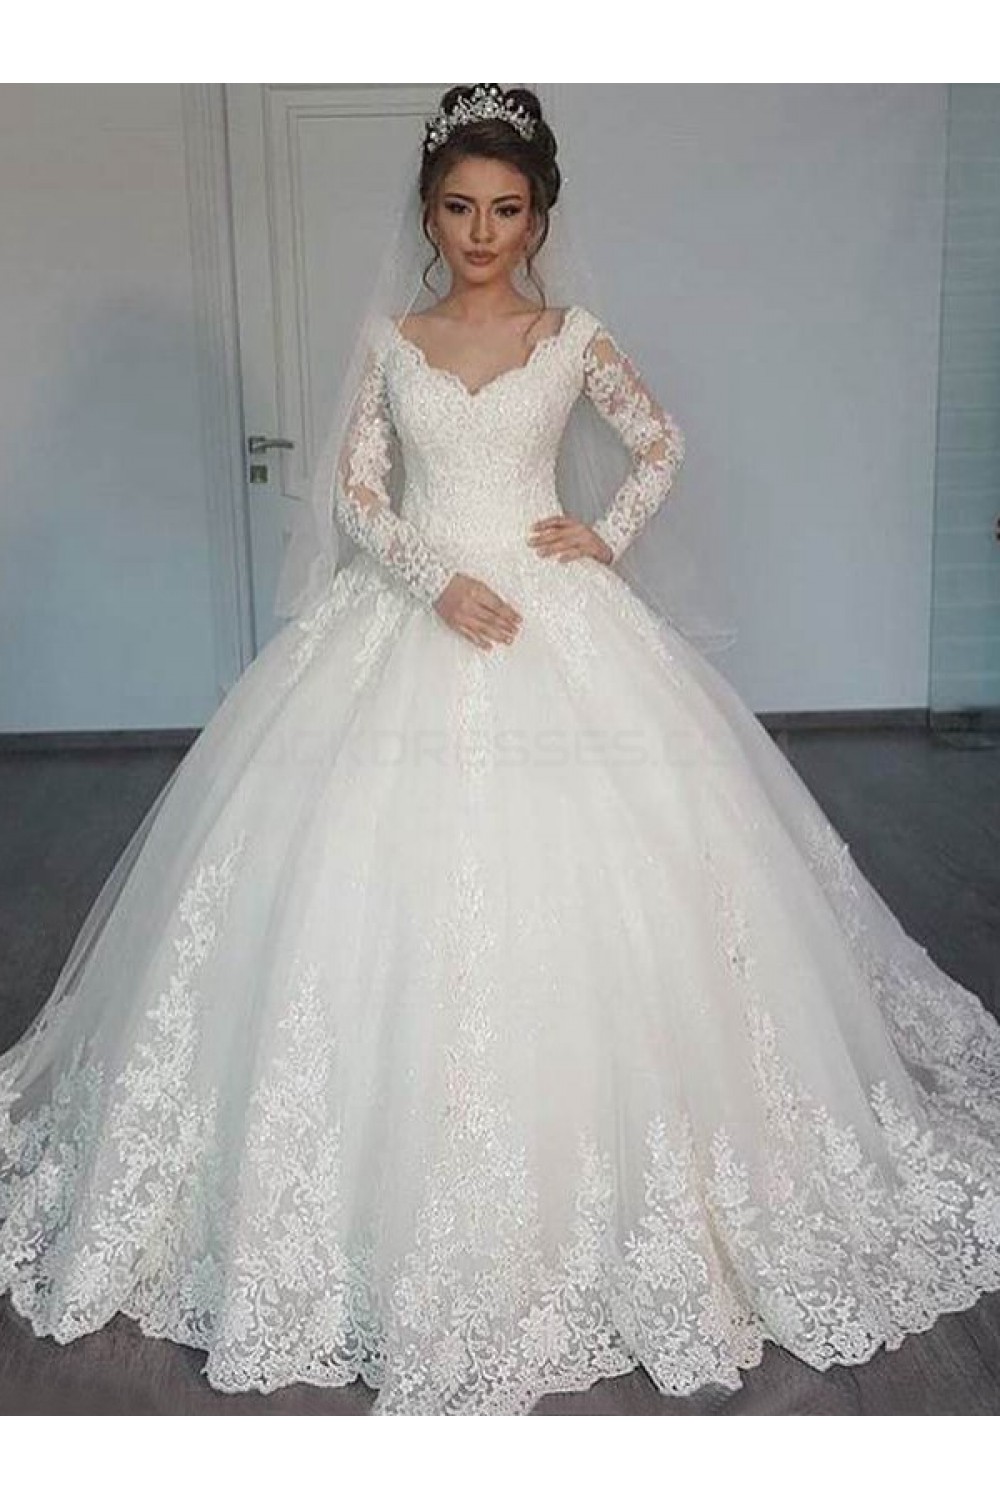 Bridal Ball Gown V Neck Lace Long Sleeves Wedding Dresses Bridal Gowns 3030126 6739